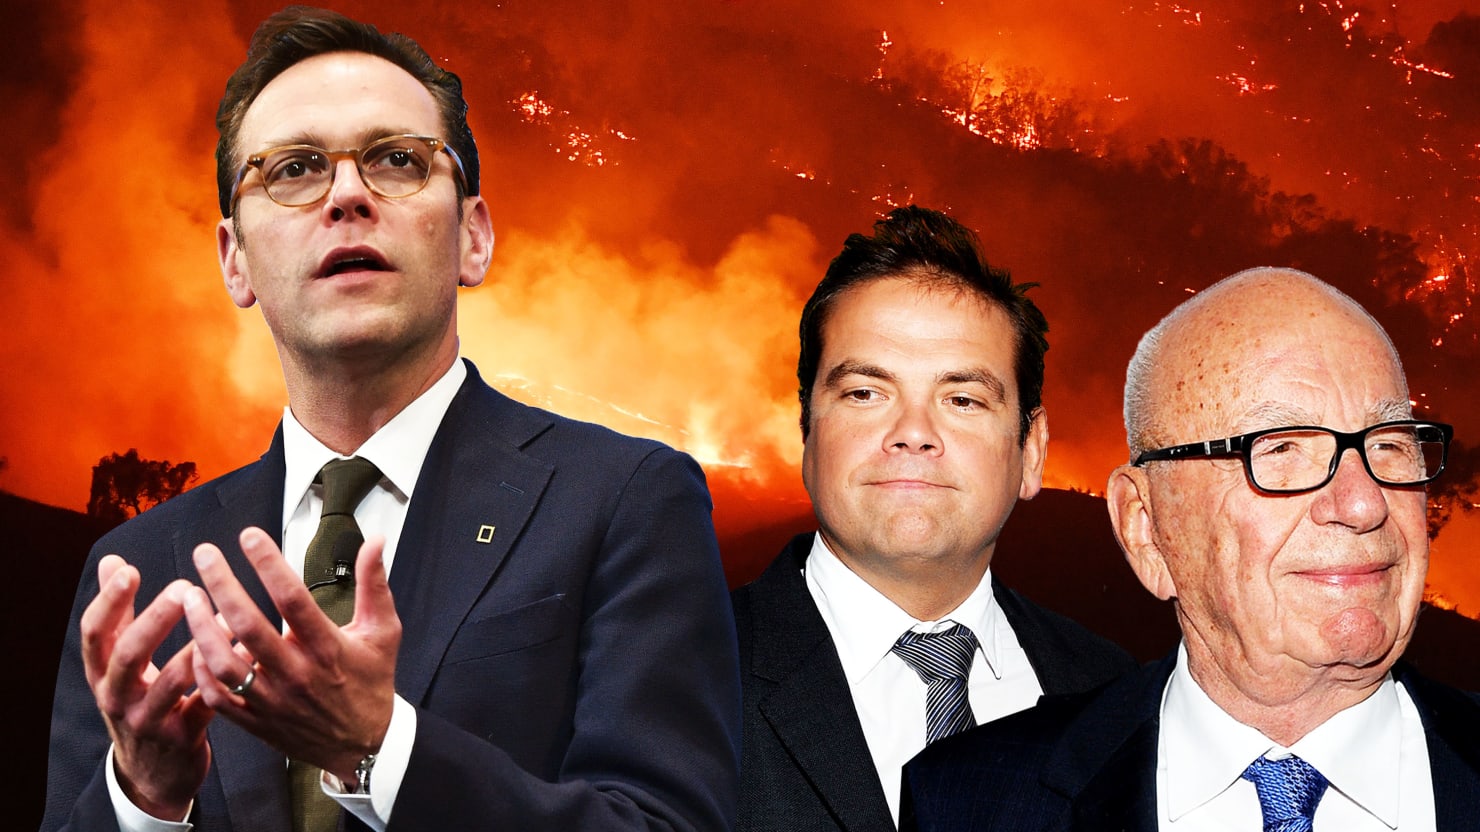 James Murdoch Slams Fox News and News Corp Over Climate Change Denial - The Daily Beast